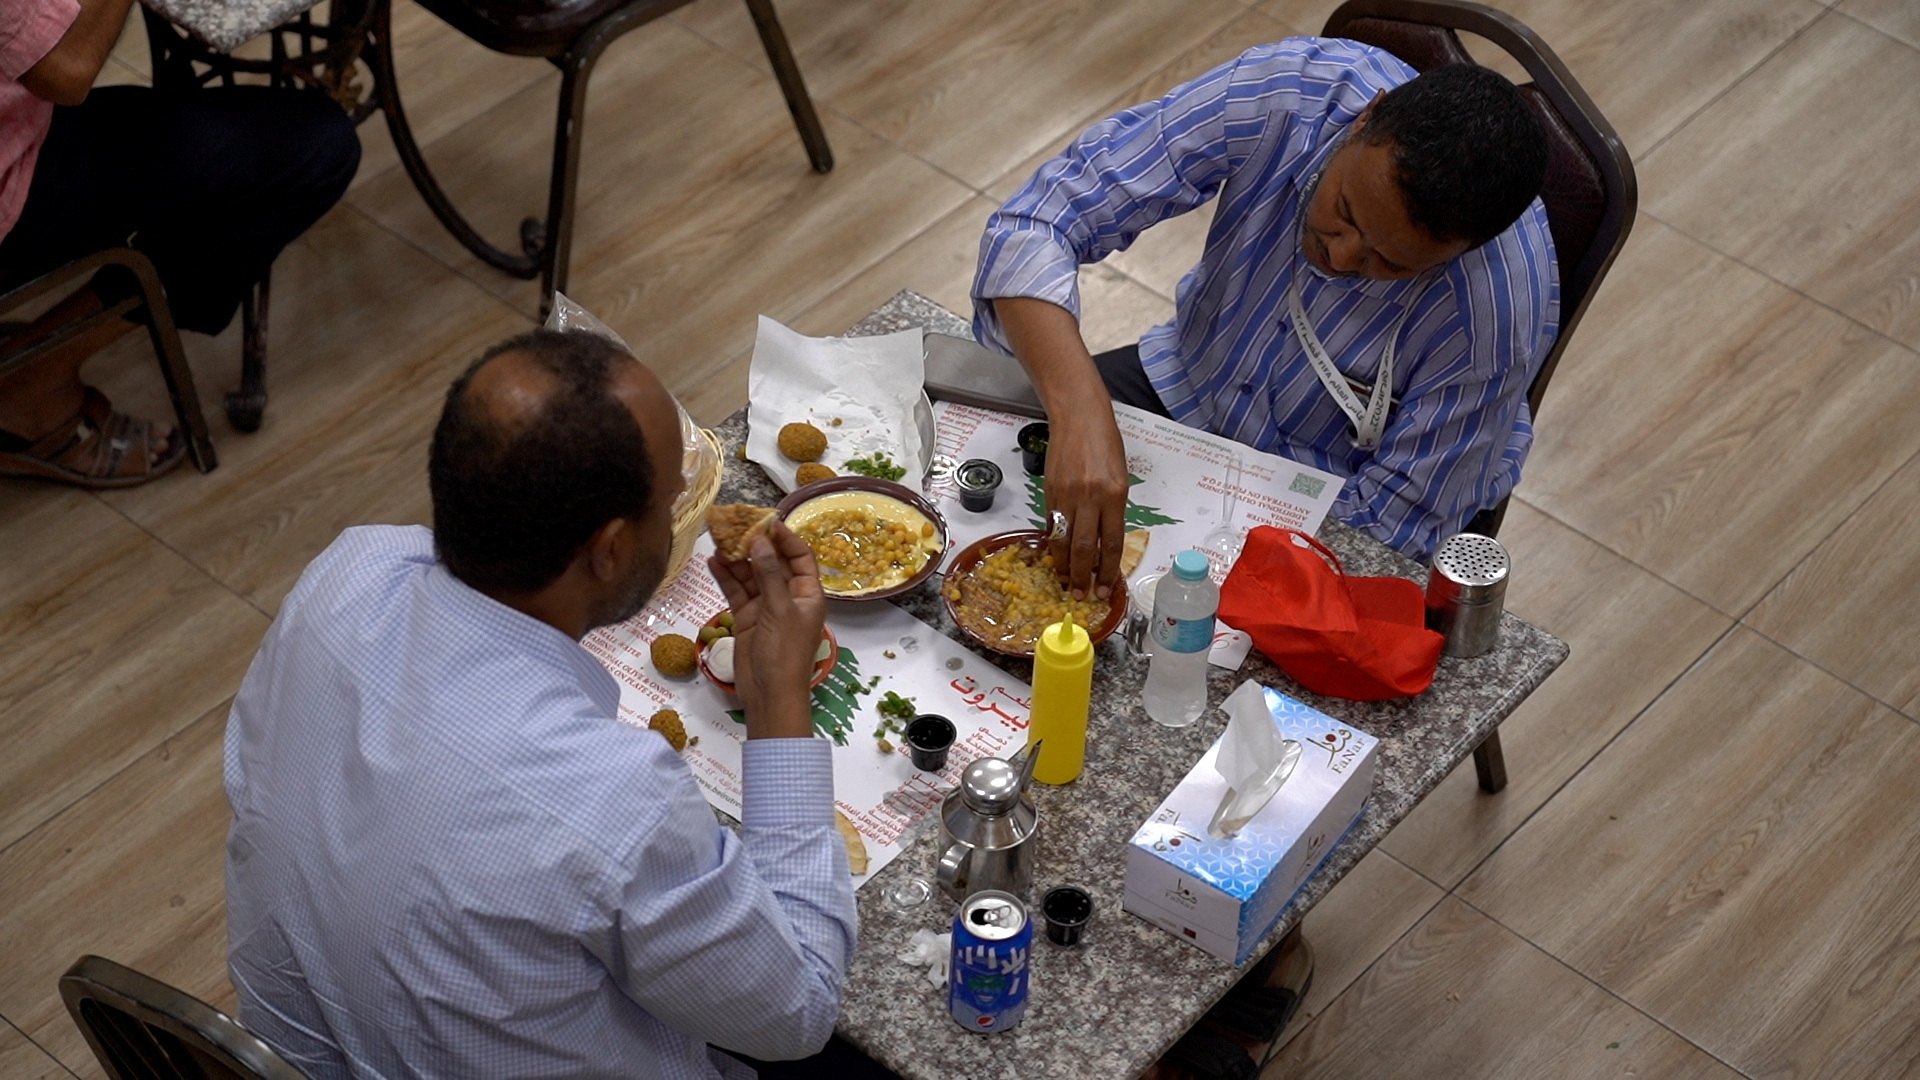 People eat at restaurant Beirut, as FIFA World Cup Qatar 2022 takes place, in Doha, Qatar November 22, 2022